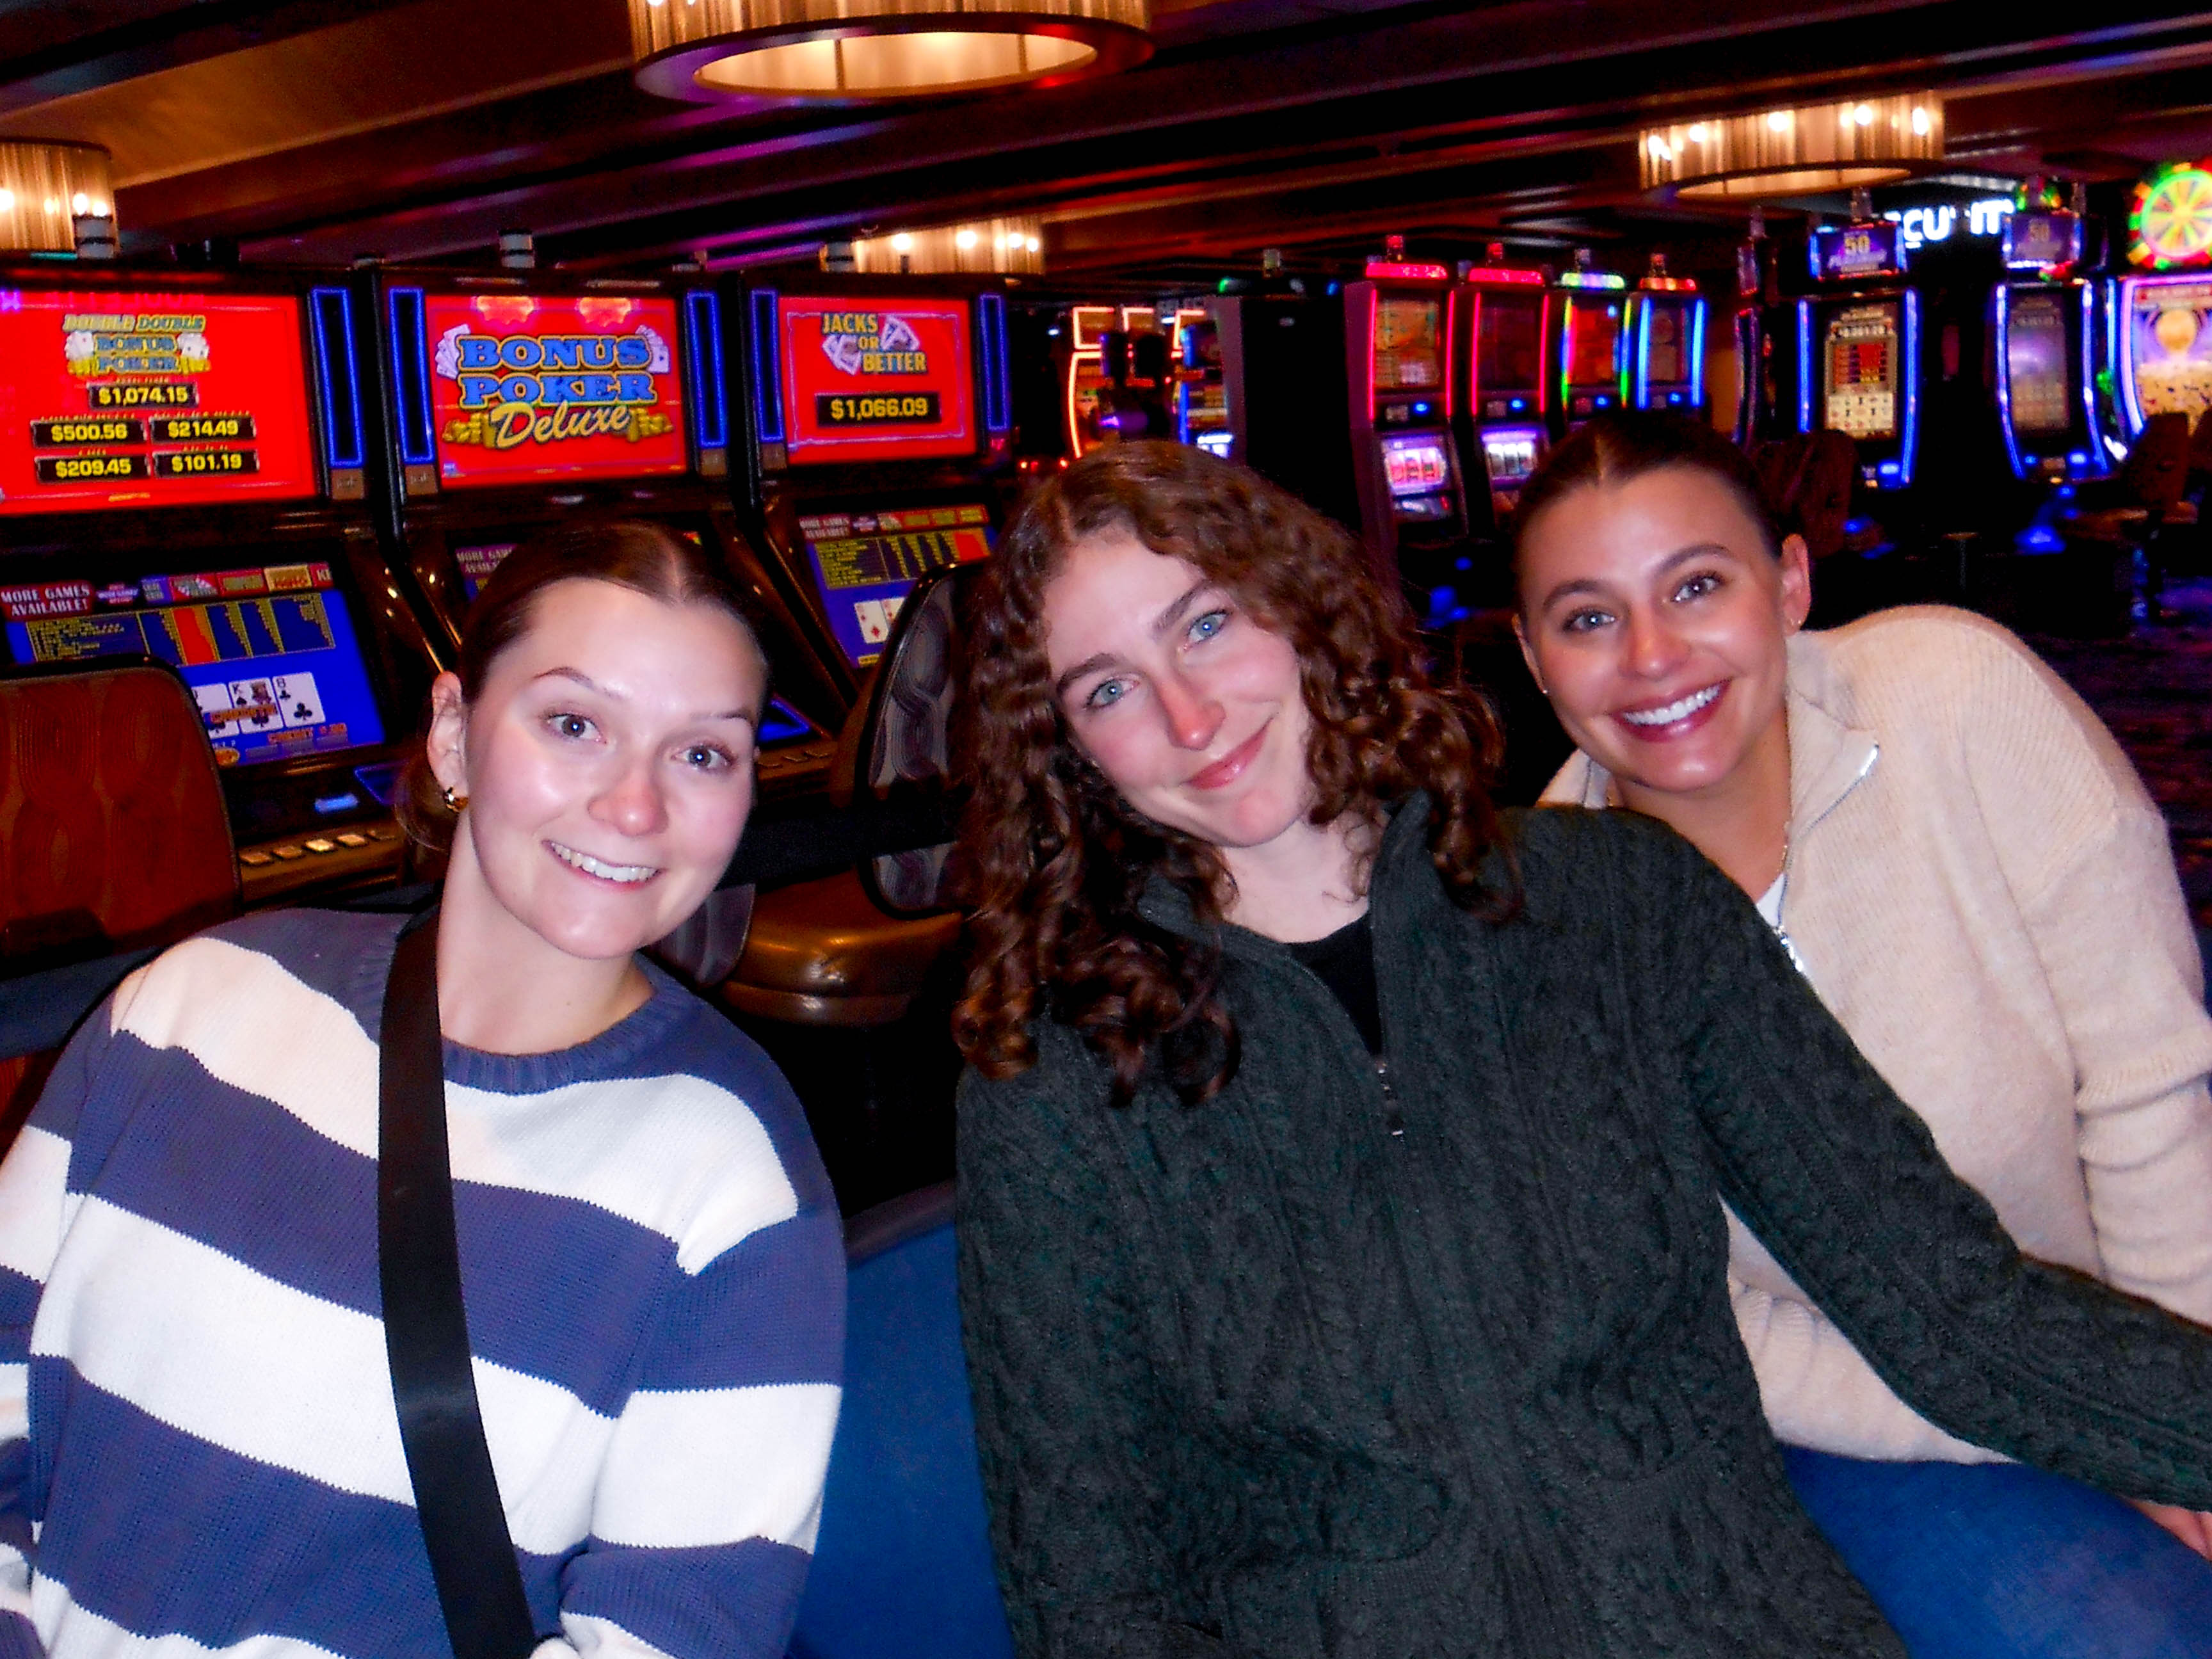 SMC Students gather in the casino at the Golden Nugget Hotel after a day in the snow to watch the Gaels beat Gonzaga in the Men’s Basketball match up on February 3, 2024./Photo courtesy of Olivia Virgin ‘24